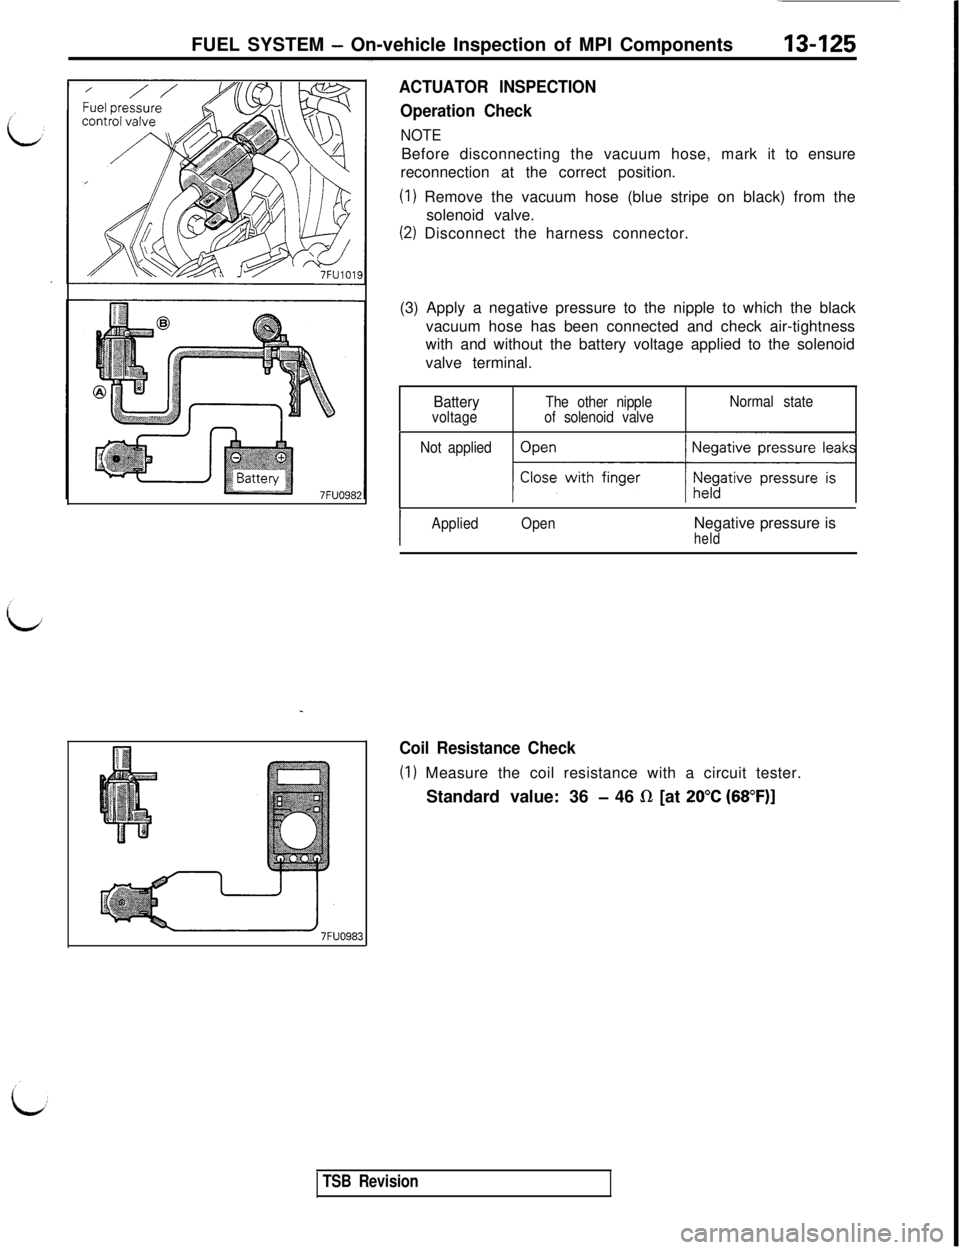 MITSUBISHI 3000GT 1991  Service Manual FUEL SYSTEM - On-vehicle Inspection of MPI Components13-125
ACTUATOR INSPECTION
Operation Check
NOTEBefore disconnecting the vacuum hose, mark it to ensure
reconnection at the correct position.
(1) Re